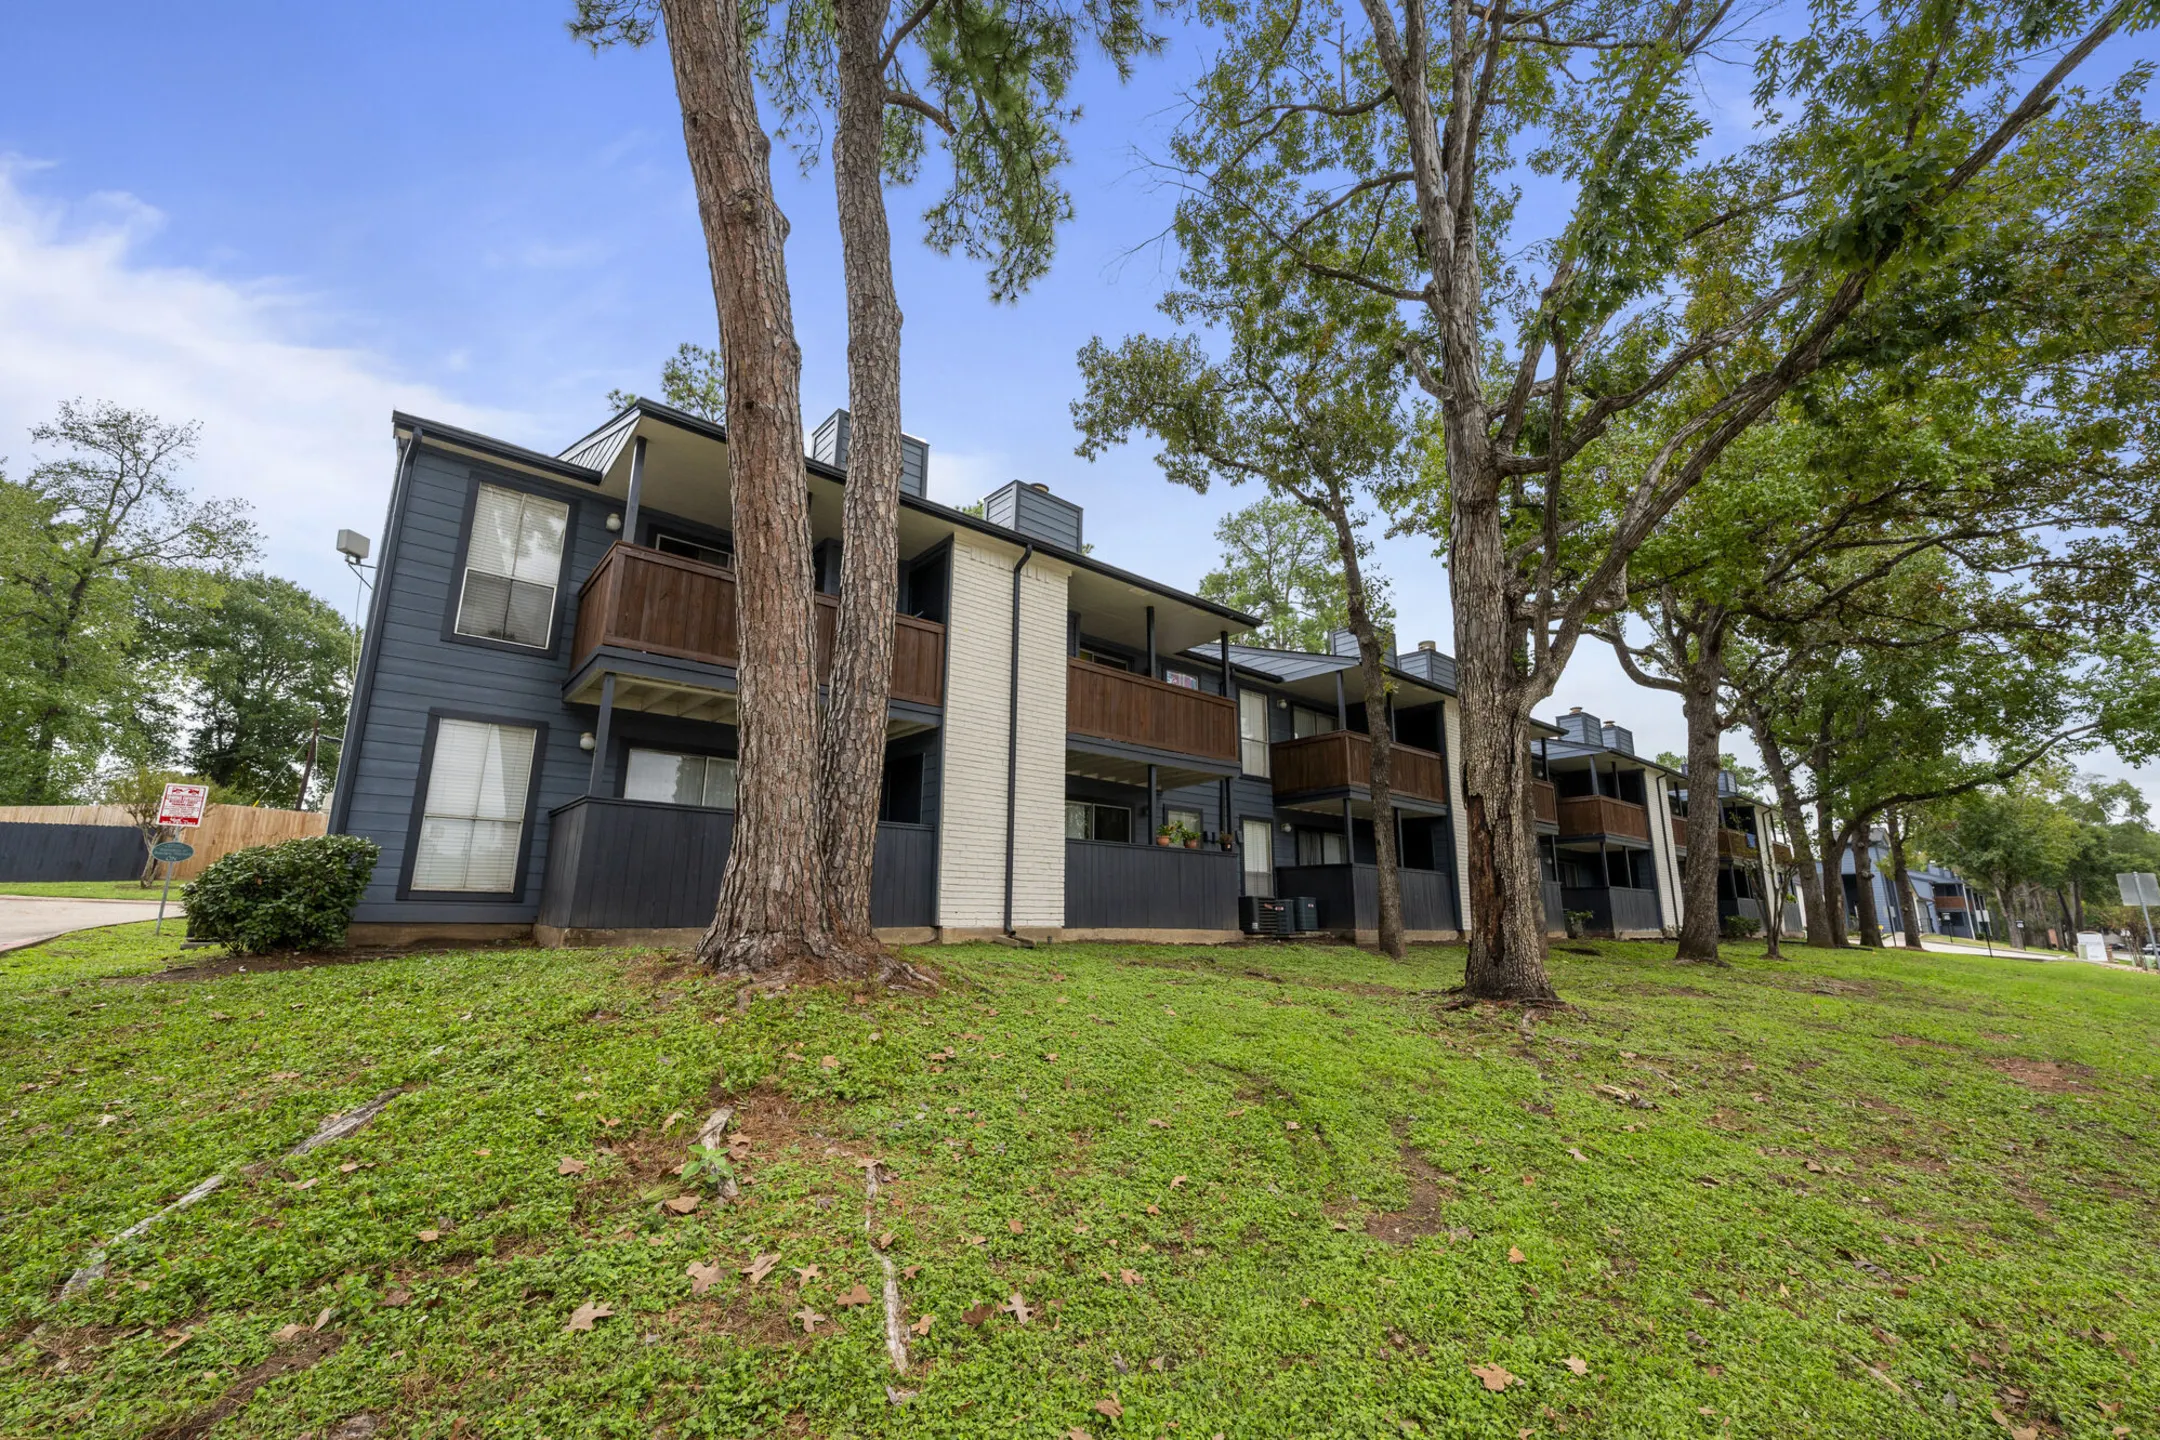 Building - Northside Heights - Conroe, TX